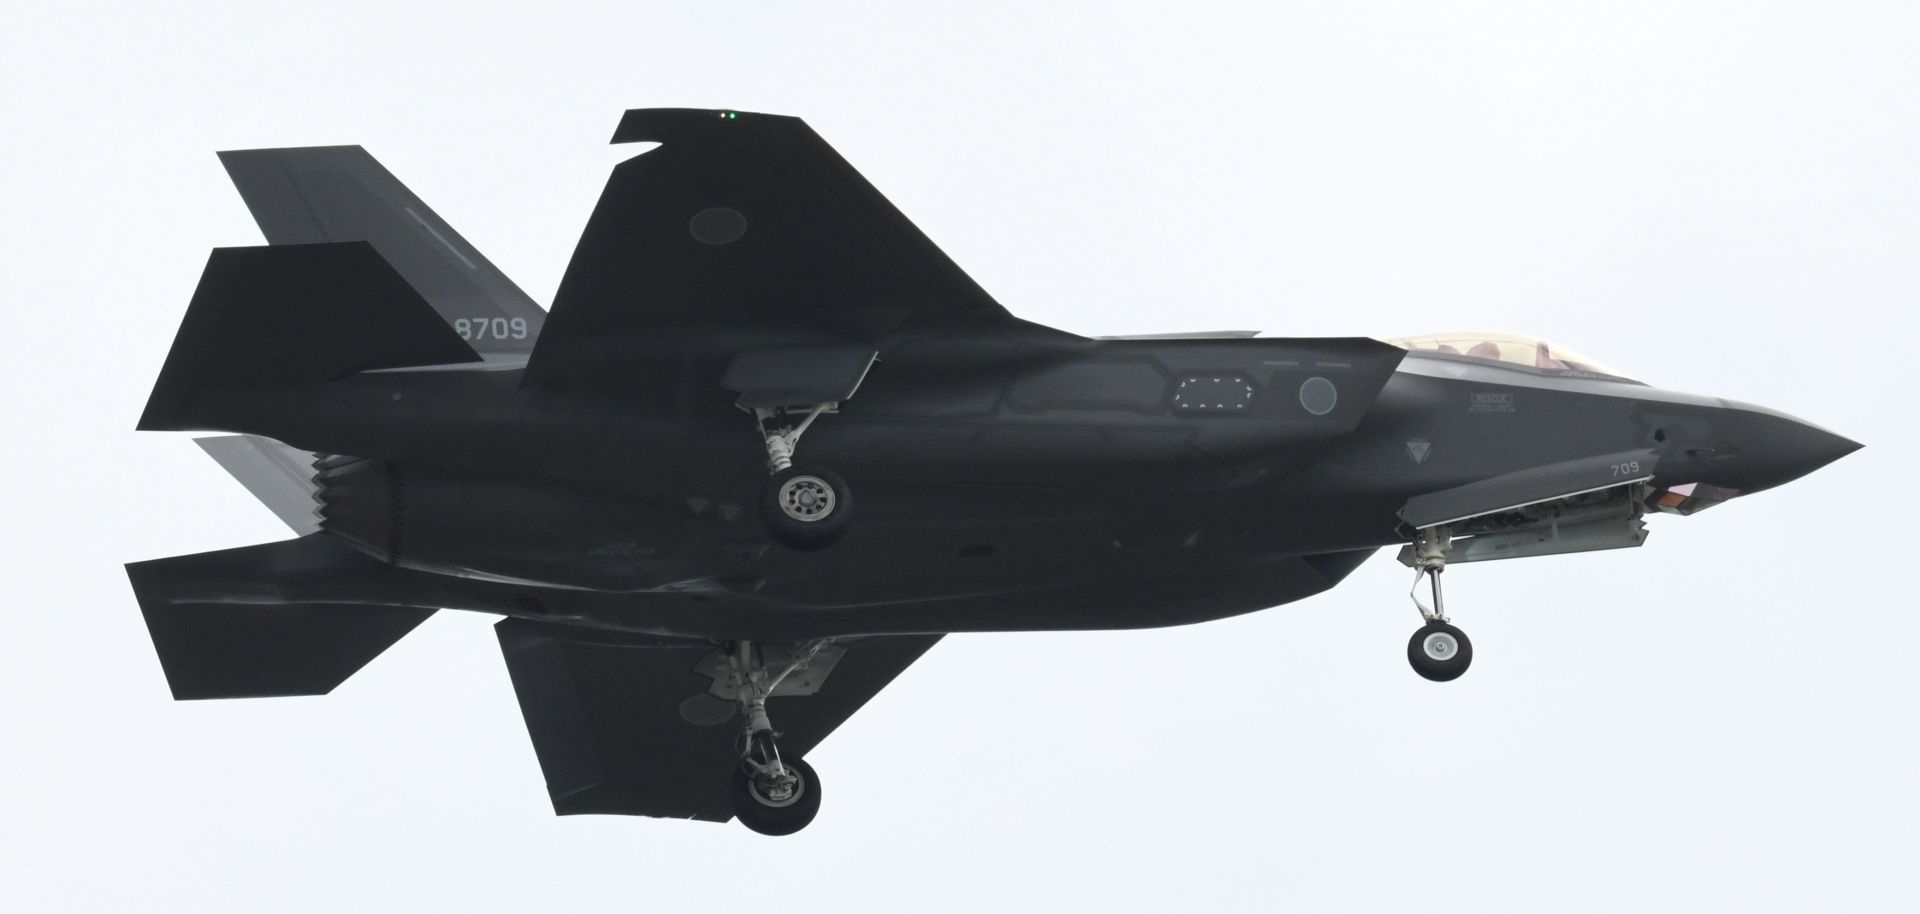 An Oct. 14, 2018, photo shows an F-35A fighter aircraft of the Japan Air Self-Defense Force taking part in a military review at Asaka training ground in Asaka, Saitama prefecture, Japan.